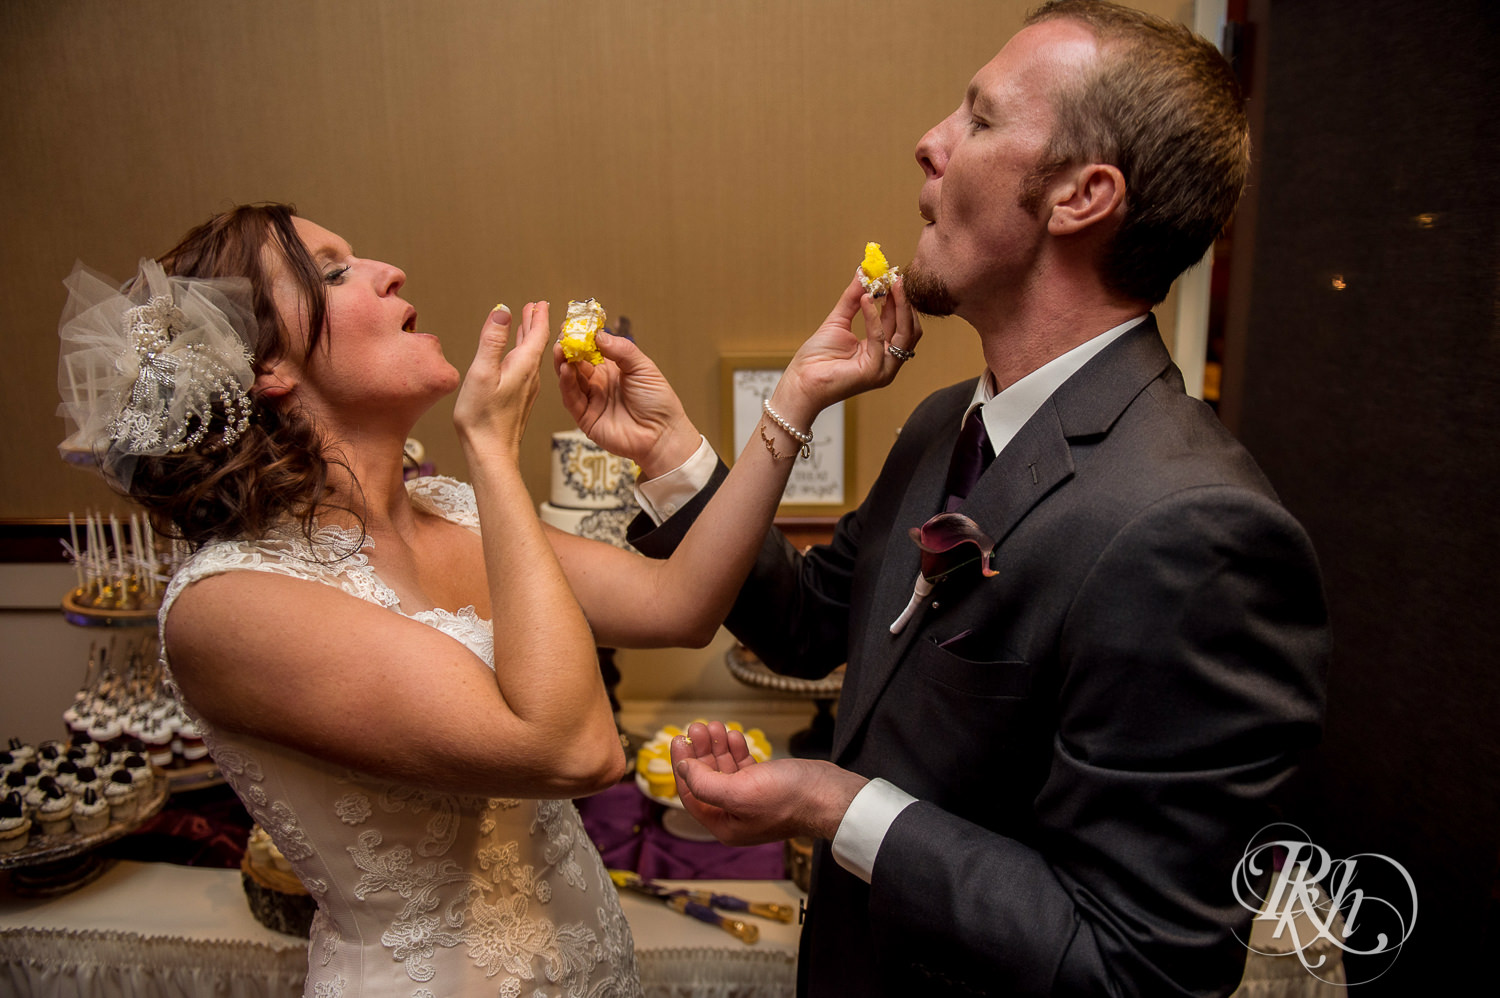 Bride and groom feed each other cake during wedding reception at White Bear Country Inn in White Bear Lake, Minnesota.